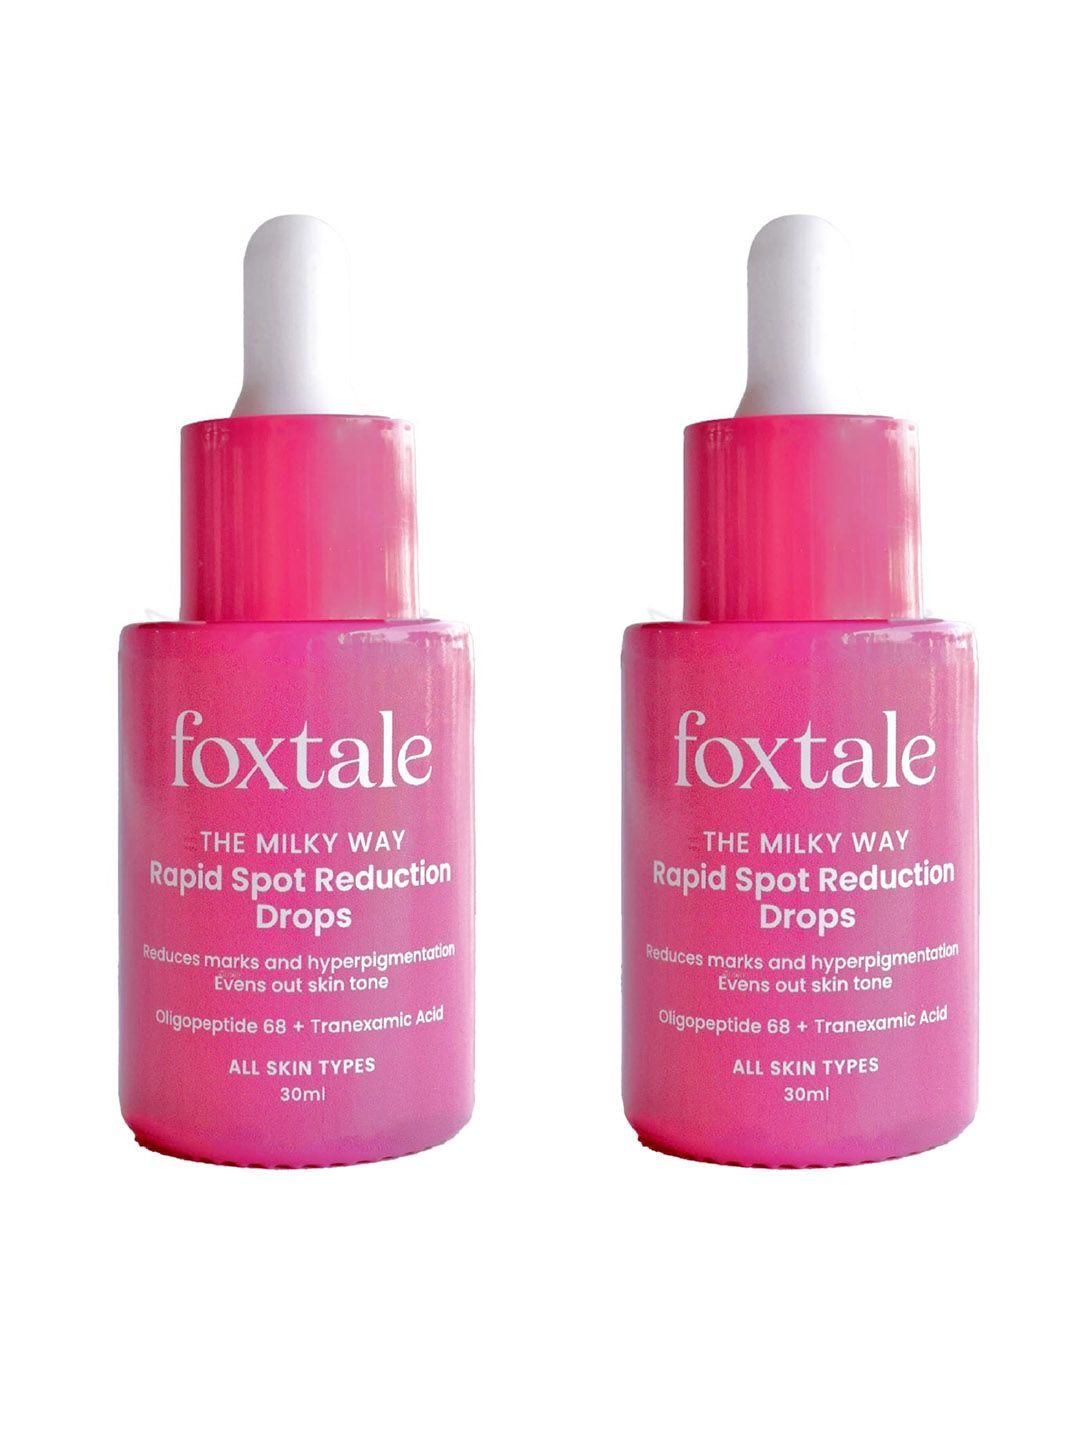 foxtale set of 2 the milky way rapid spot reduction drop serum with tranexamic - 30ml each